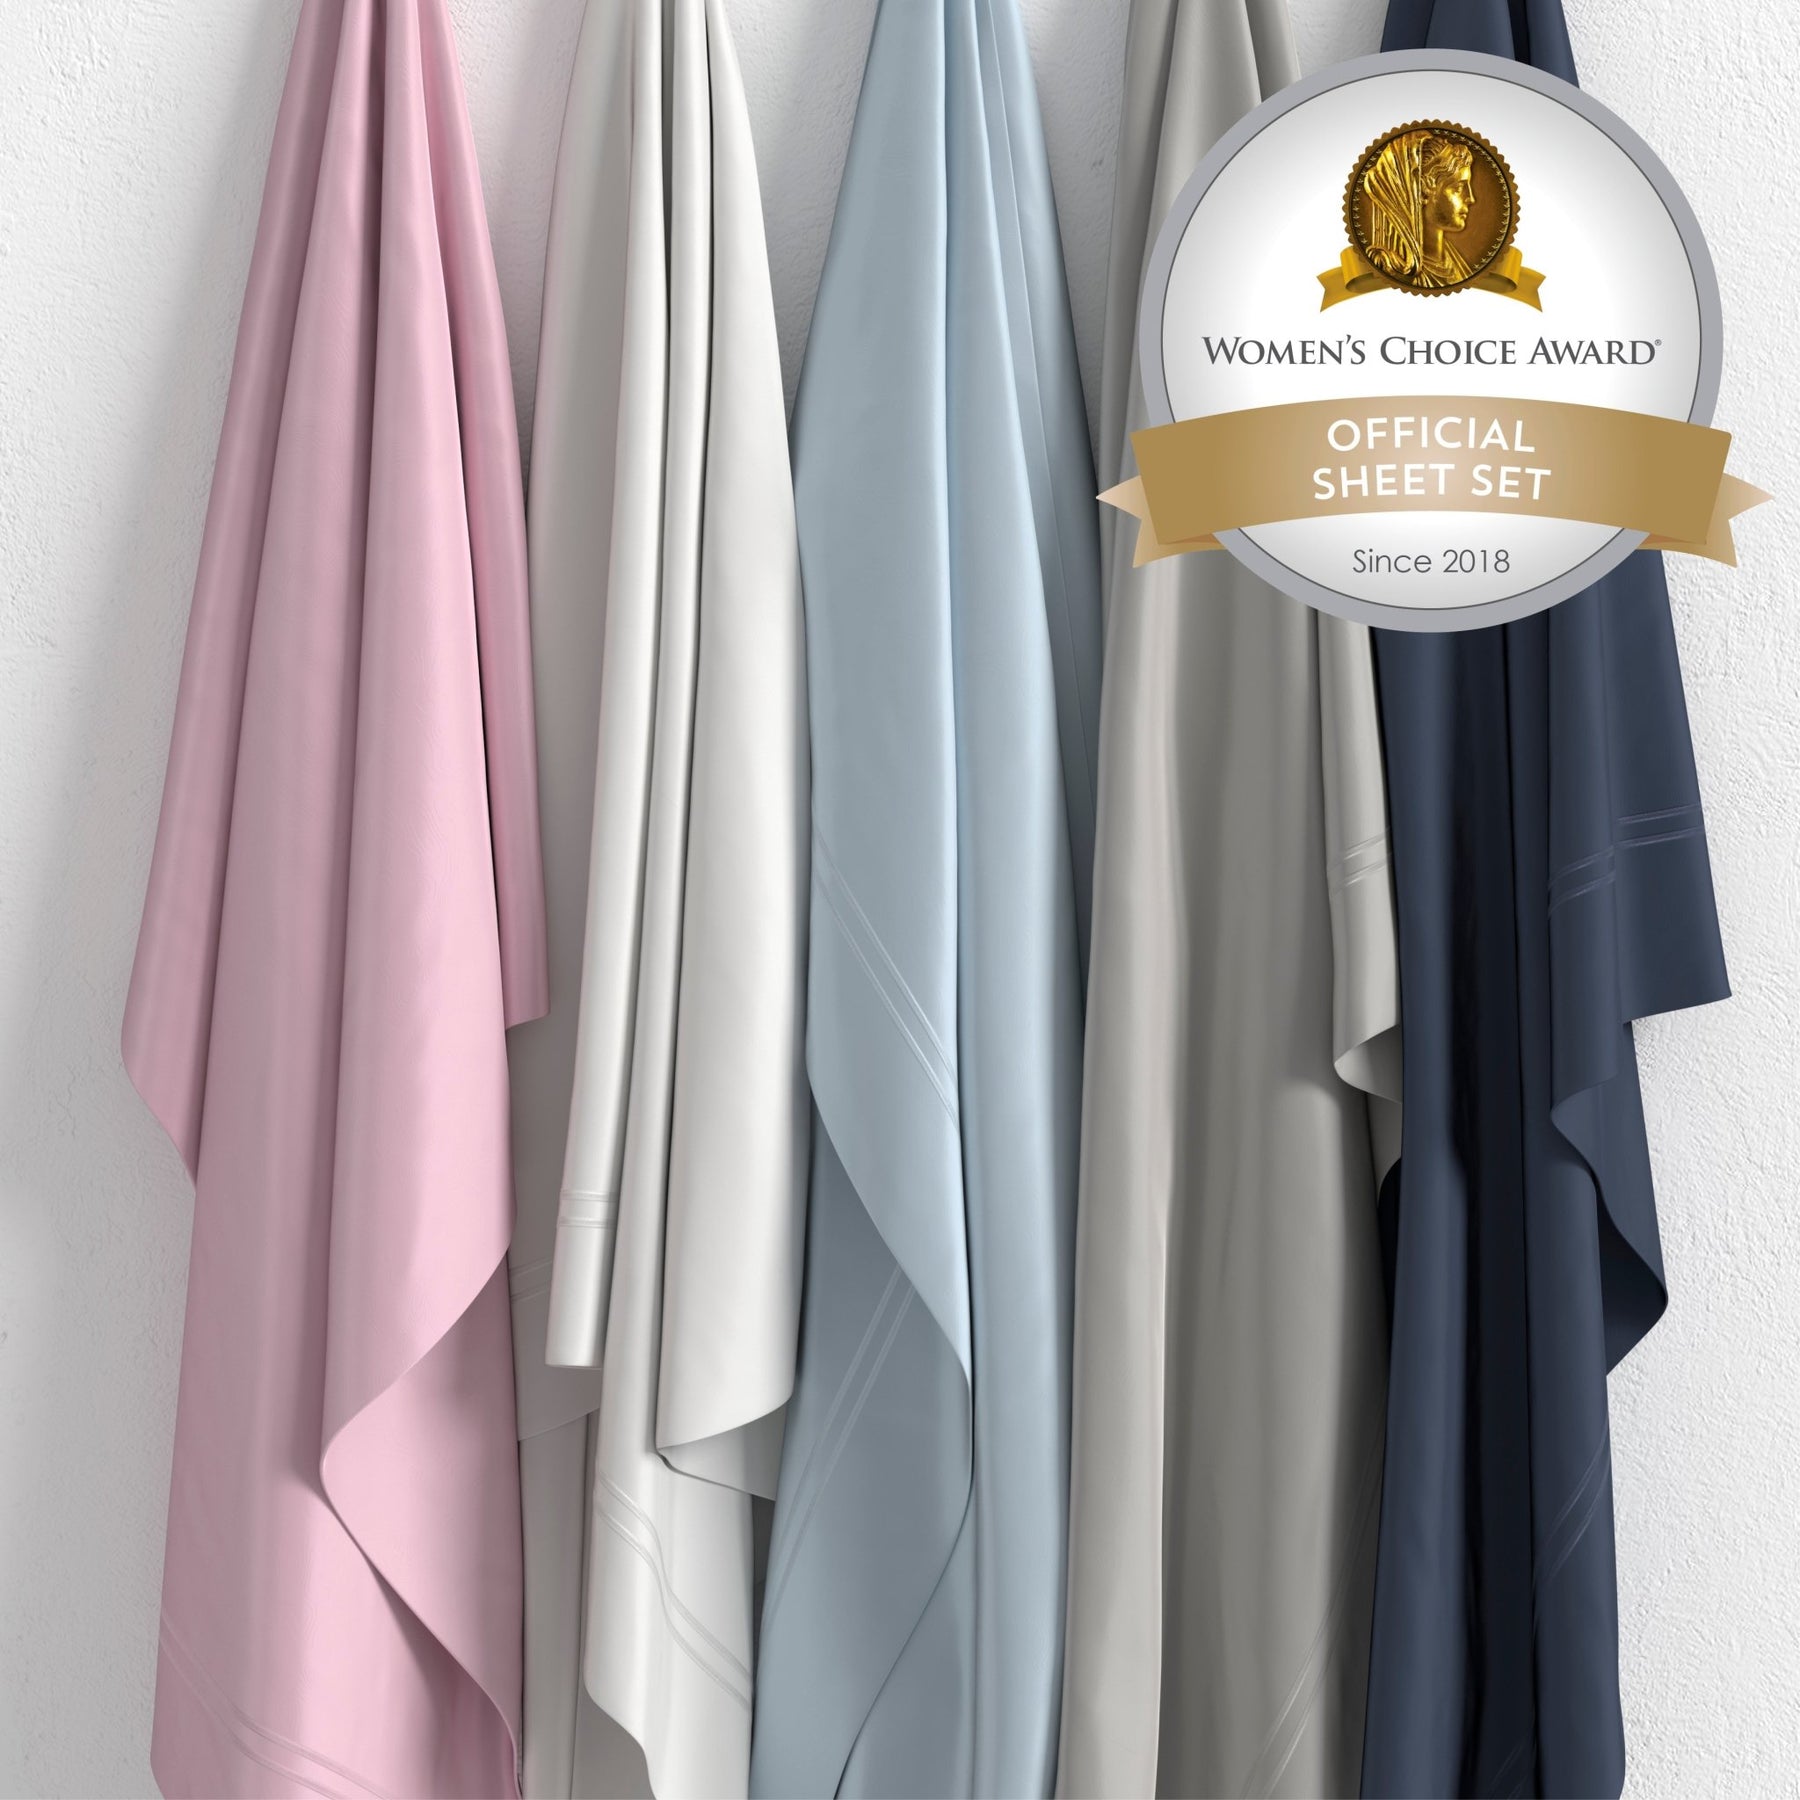 Image of all five color ways of Refreshing TENCEL™ Lyocell Sheet Set hanging in order of Lilac, White, Light Blue, Dove Gray, Celestial Blue with a sticker in the top right corner saying "Women's Choice Award Official Sheet Set Since 2018"